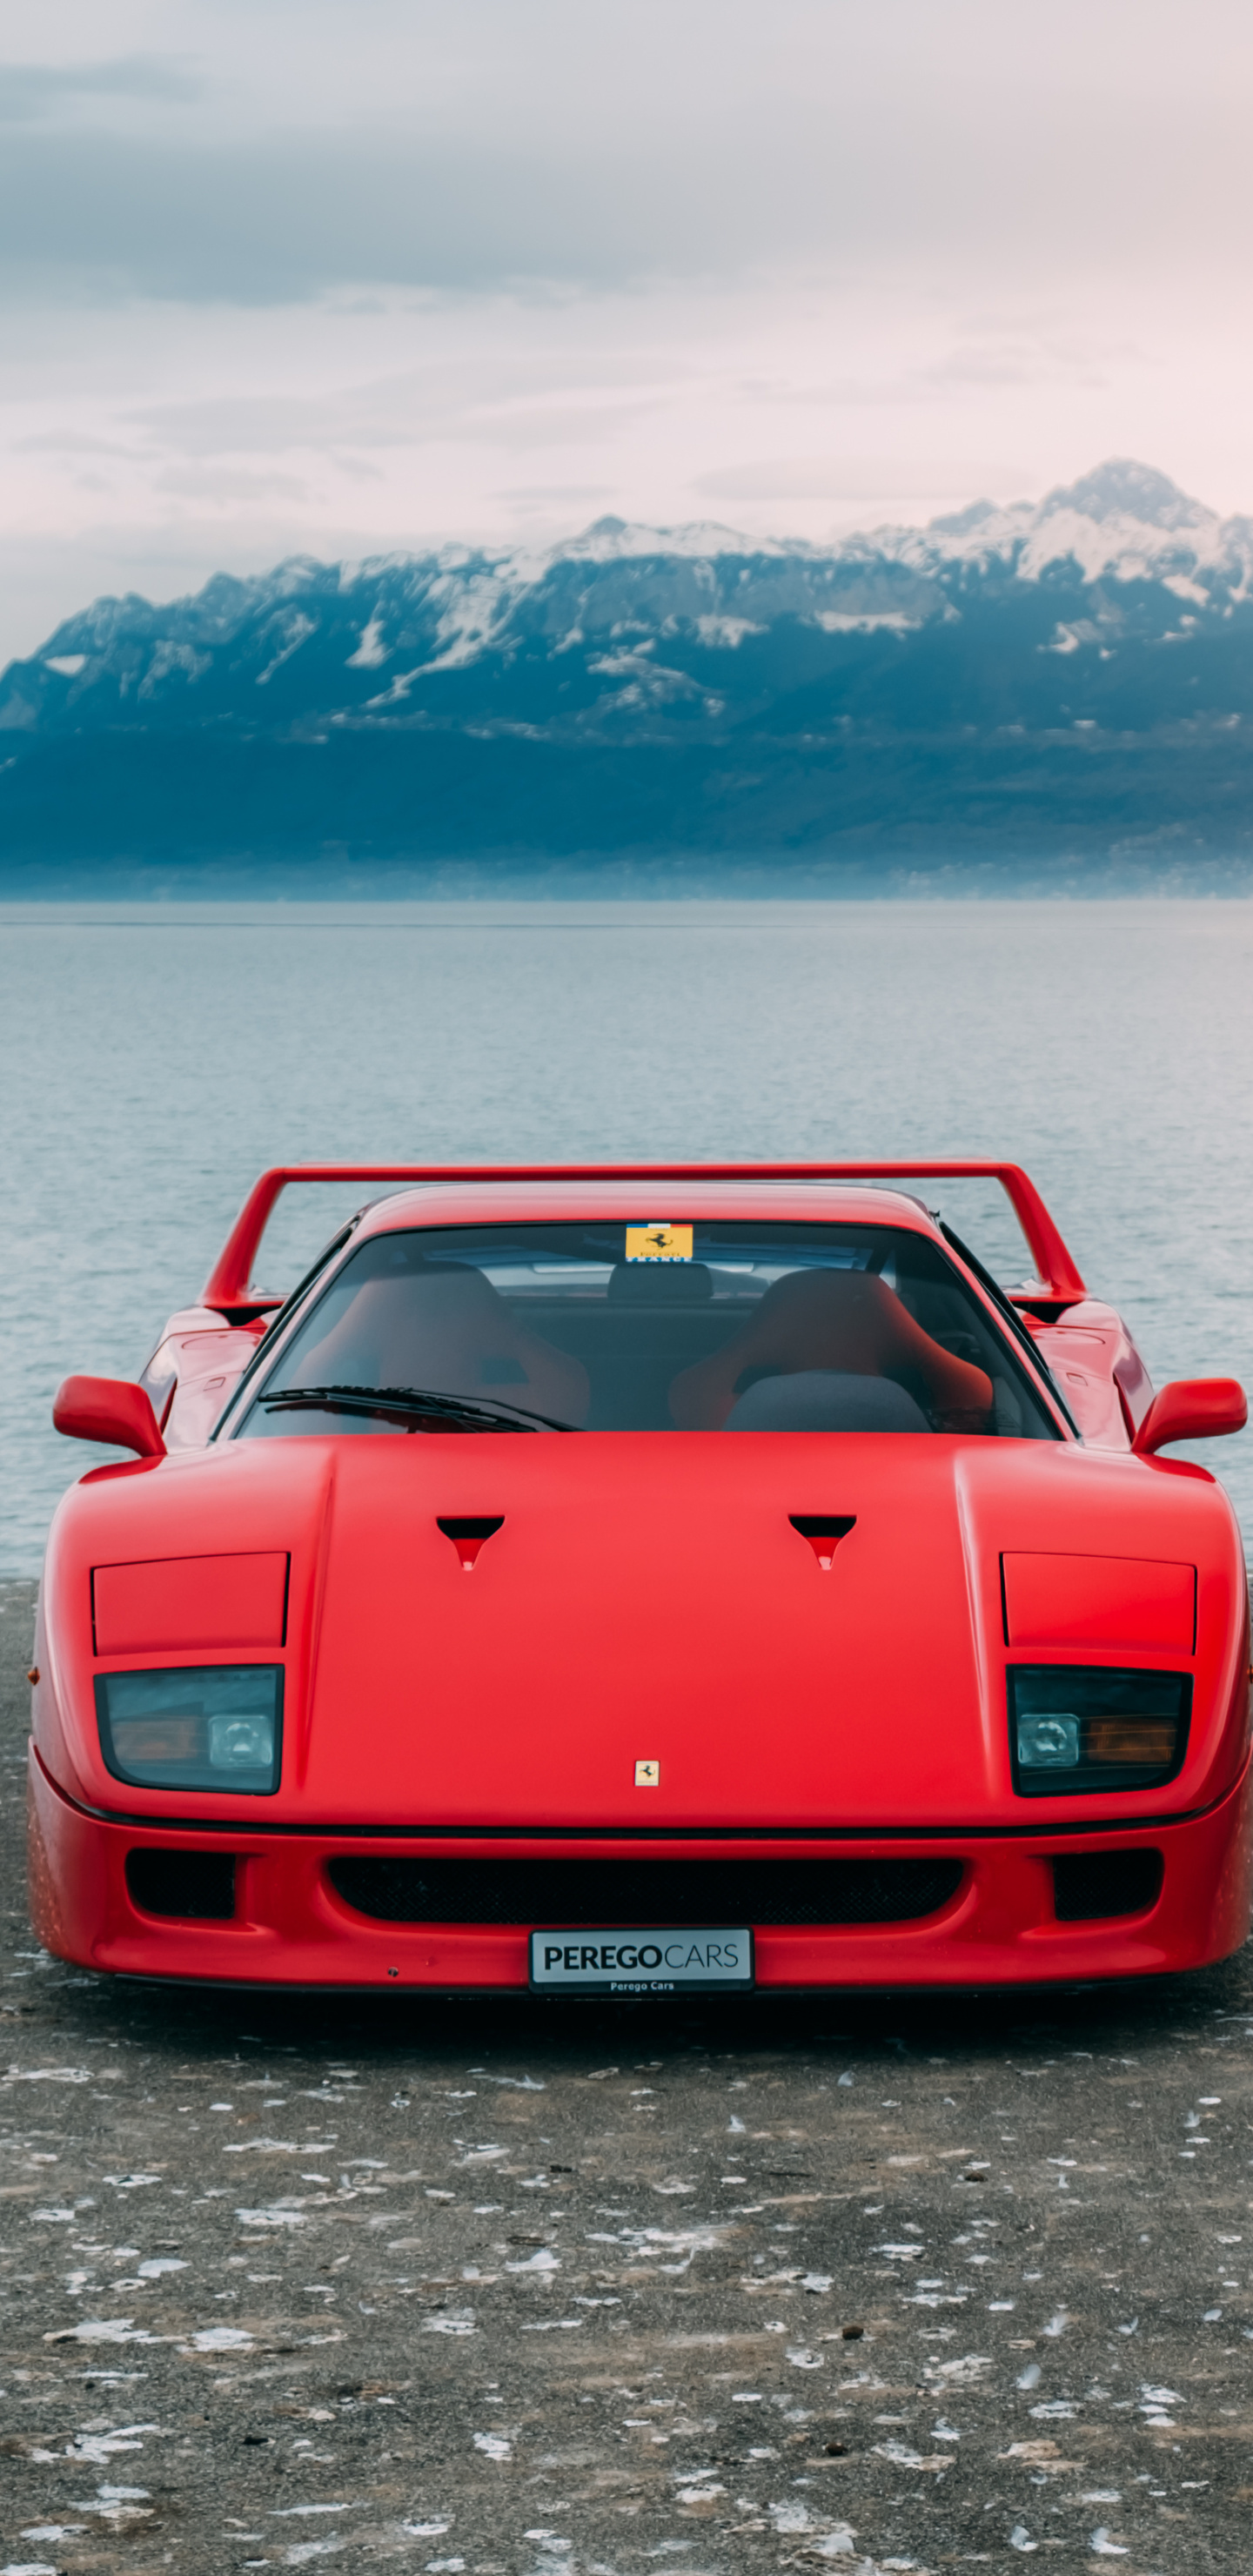 1440x2960 Ferrari F40 5k Samsung Galaxy Note 9 8 S9 S8 S8 Qhd Hd 4k Wallpapers Images Backgrounds Photos And Pictures